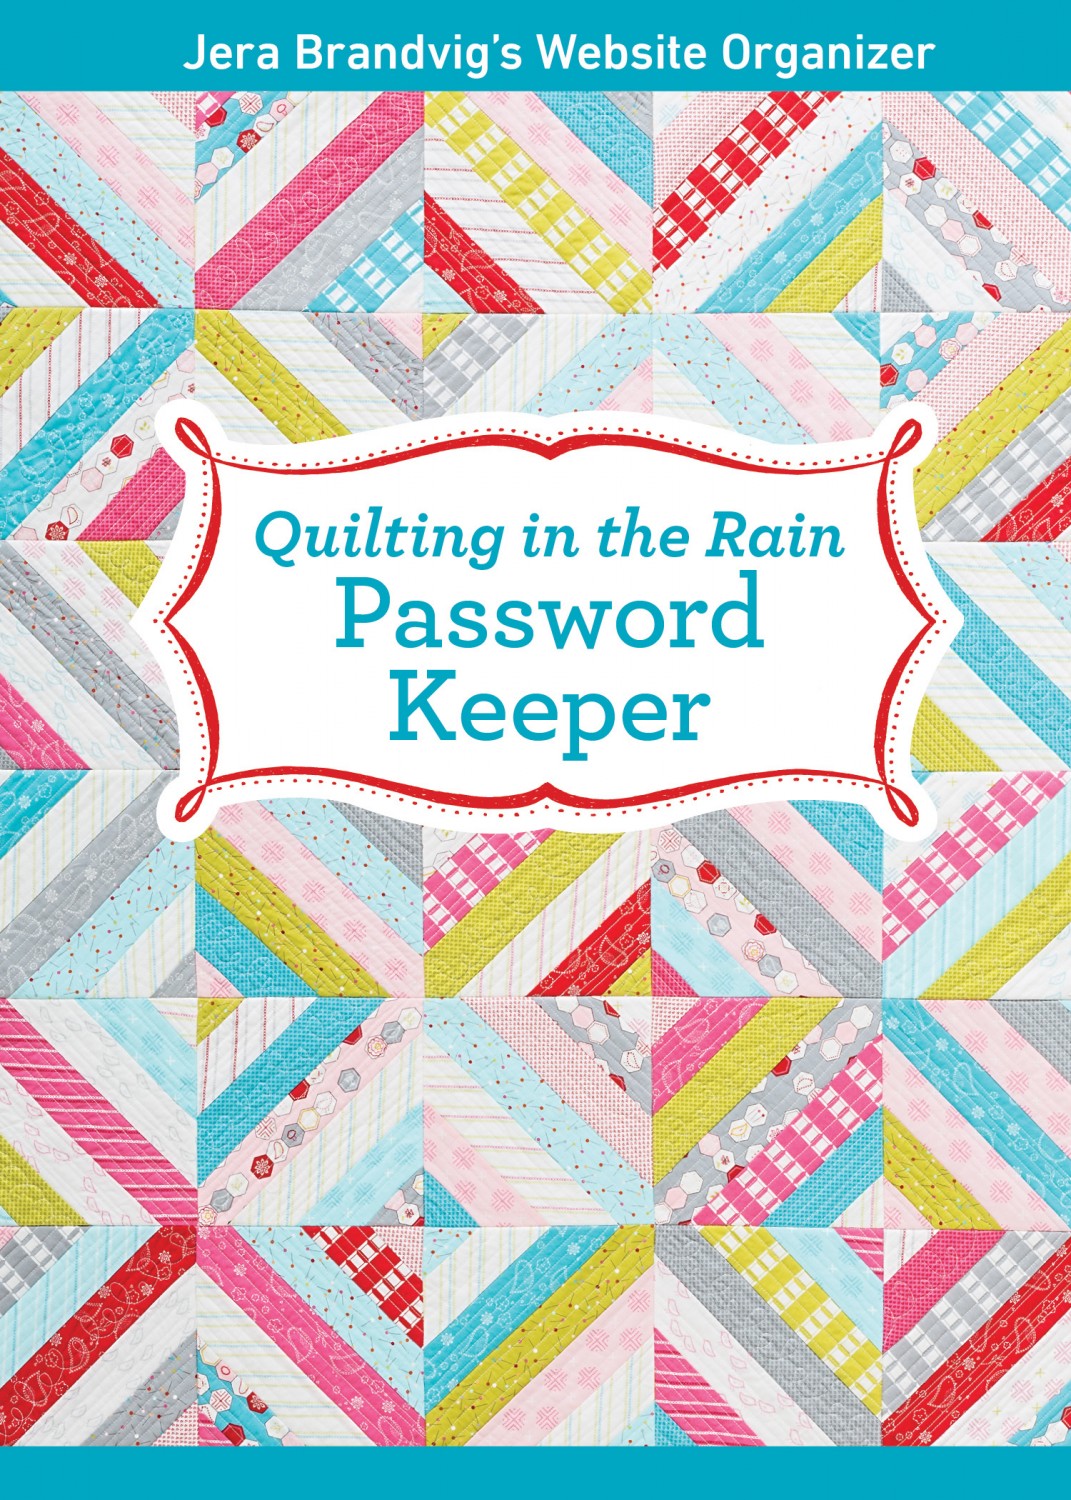 Quilting in the Rain Password Keeper